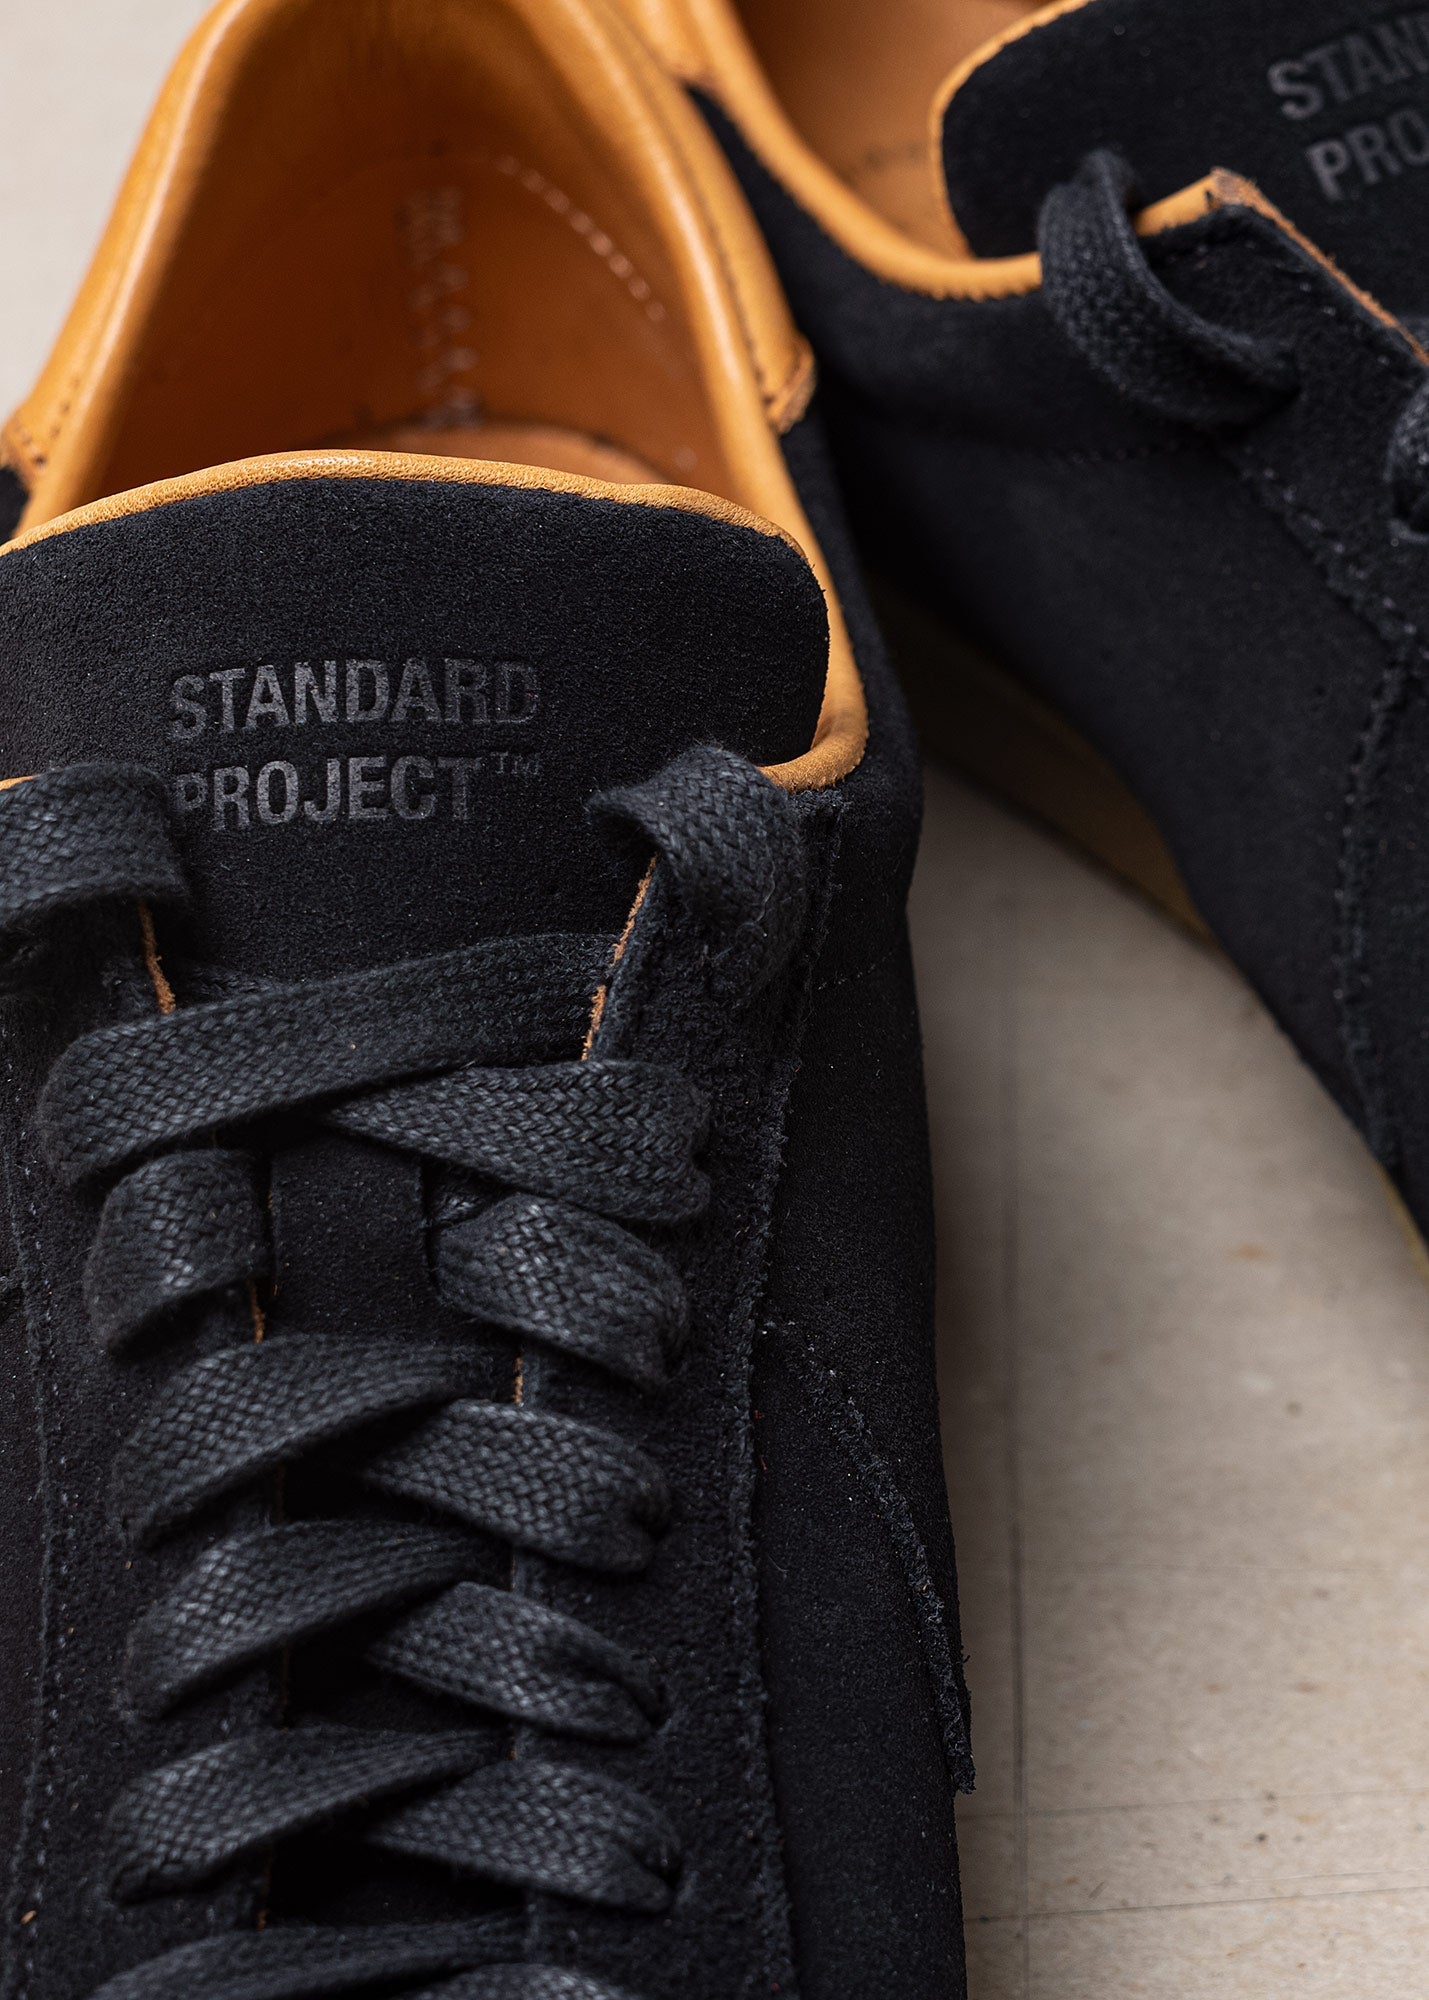 ITEM No. 15 - Trainer - Standard Project